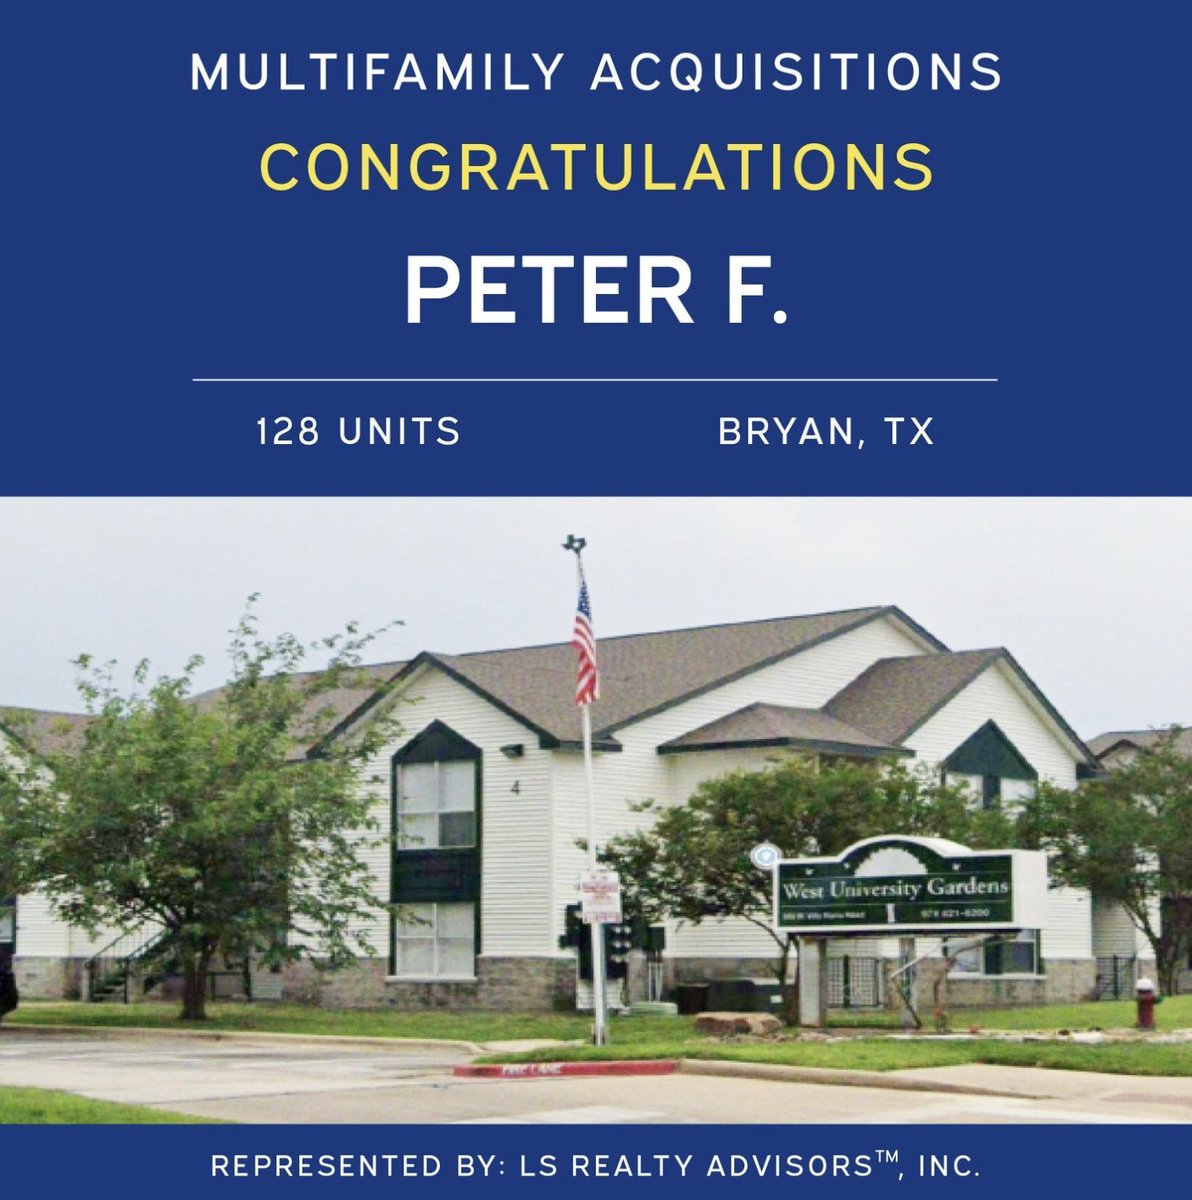 🎉 Congratulations Peter and Investor Members on your recent Multifamily Acquisition 👏 #multifamilyinvesting #multifamilyrealestate #lifestylesunlimited #passiveincome #realestateinvesting #retireearly #investinginrealestate #investing